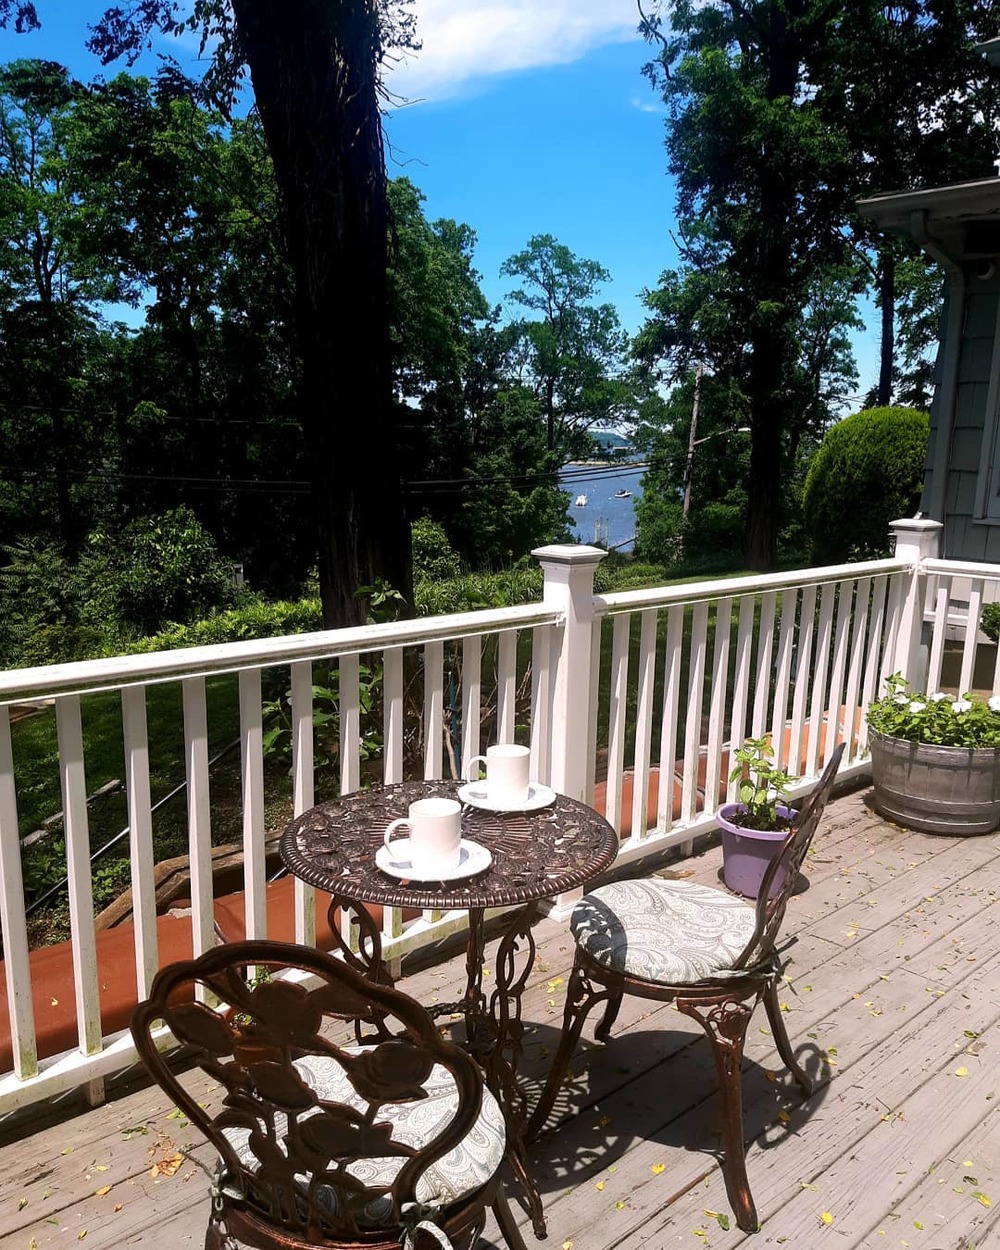 The Harbor Rose Bed & Breakfast | 253 Harbor Rd #25A, Cold Spring Harbor, NY 11724 | Phone: (516) 482-2740